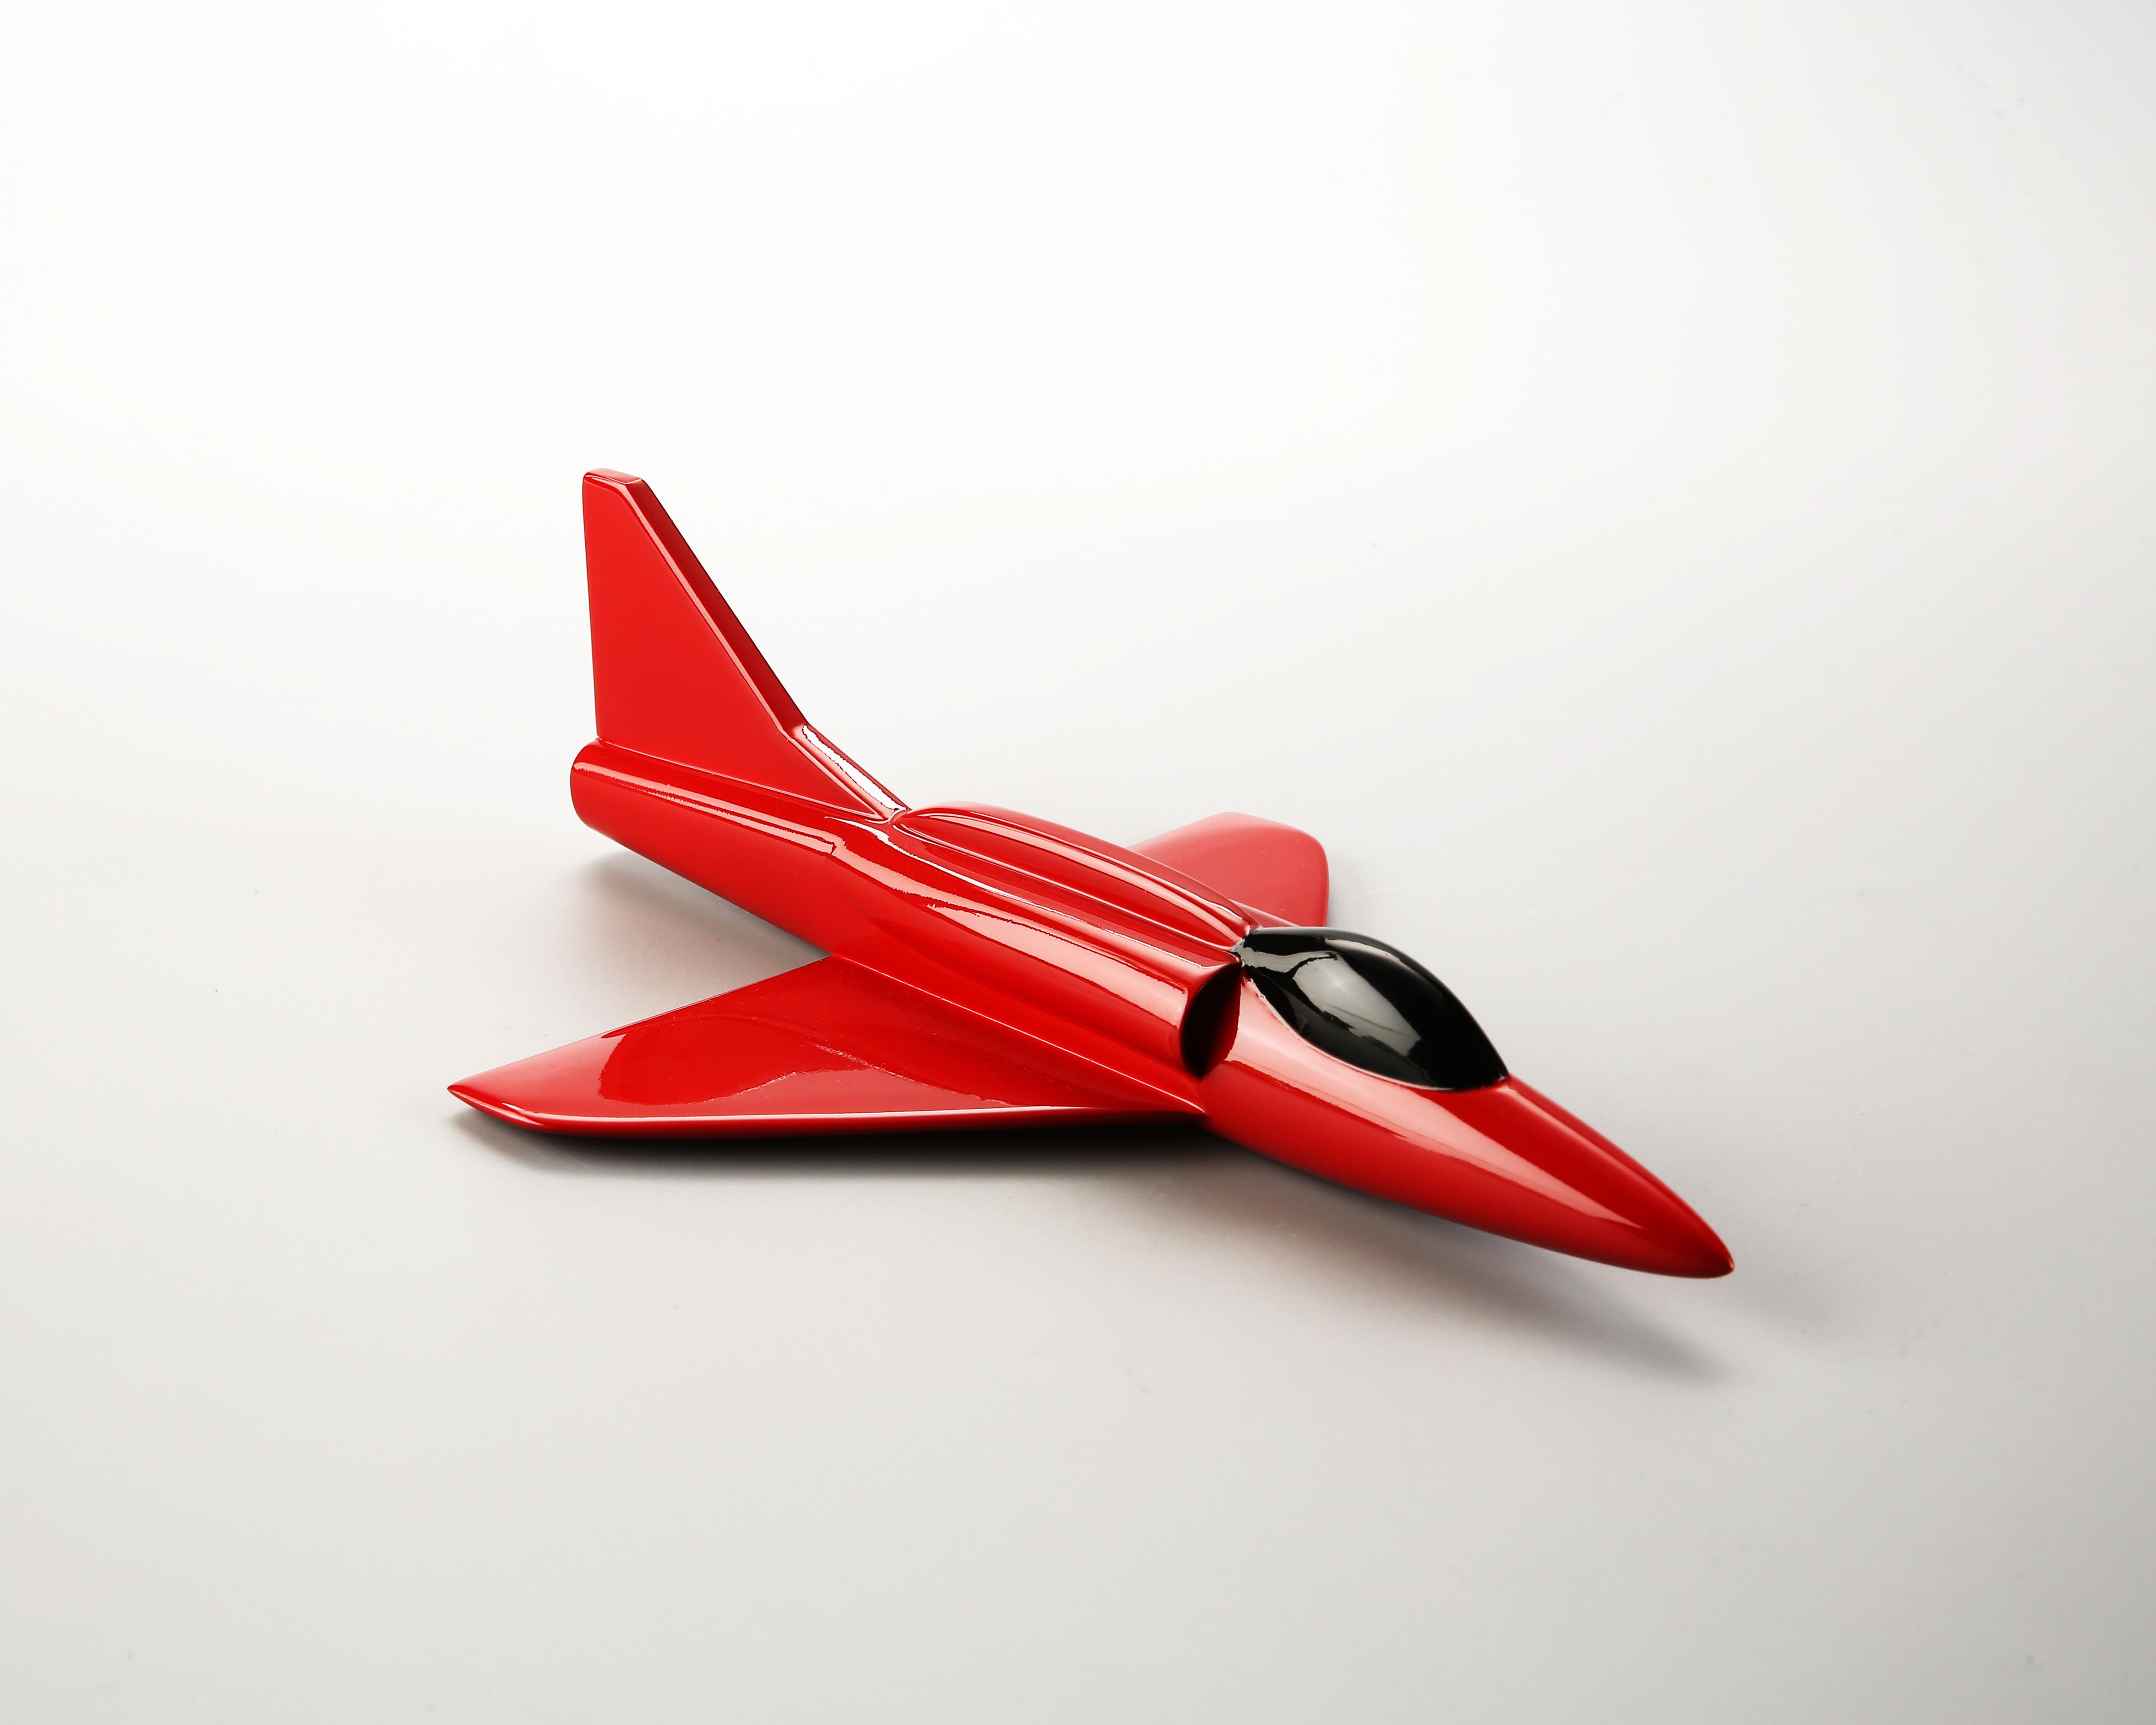 3DSPRO Spray Painted Airplane